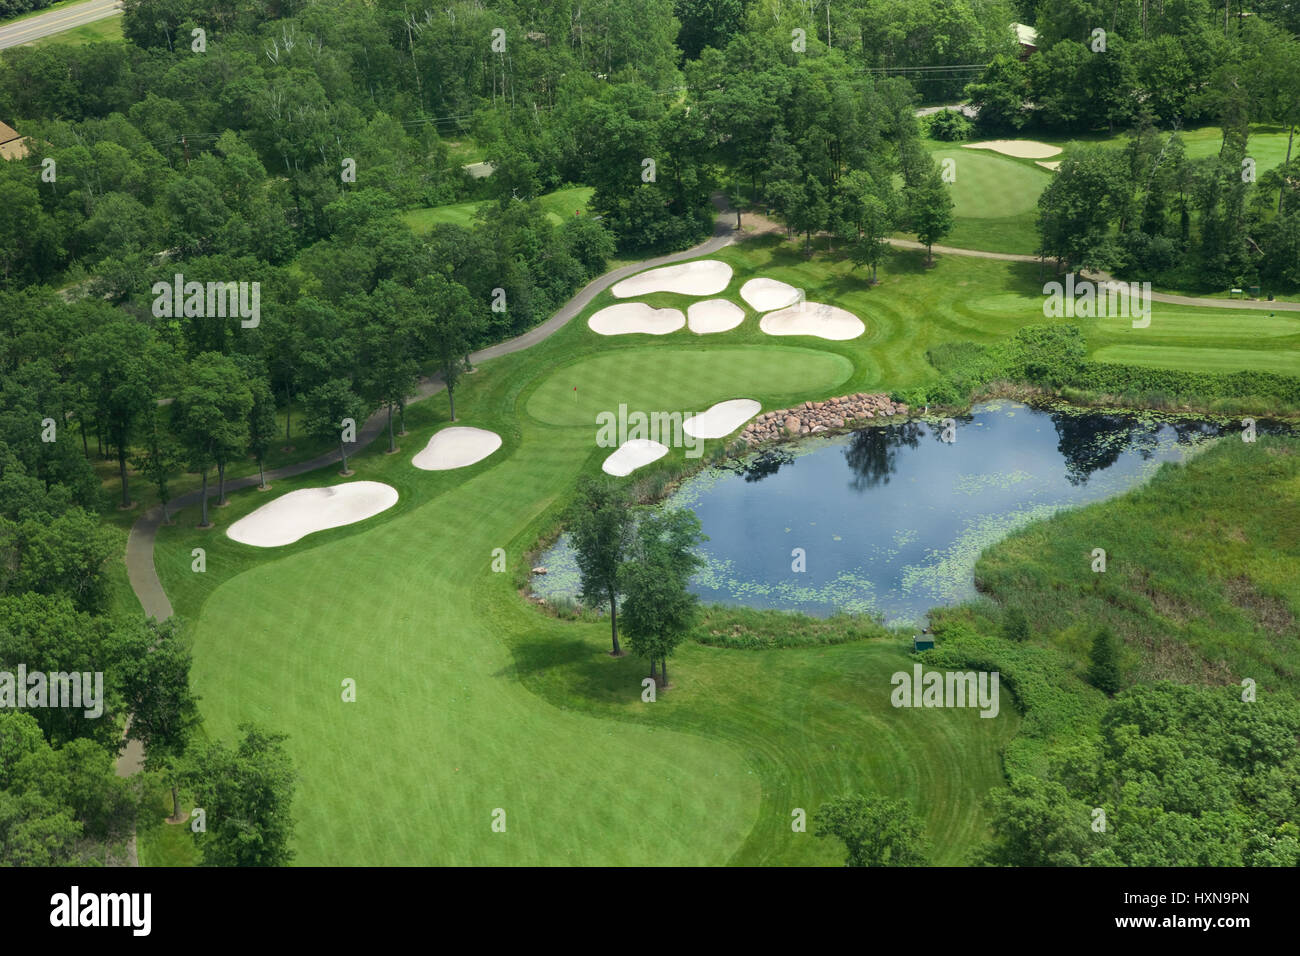 Aerial view of golf course fairway and green with sand traps, pond and trees Stock Photo